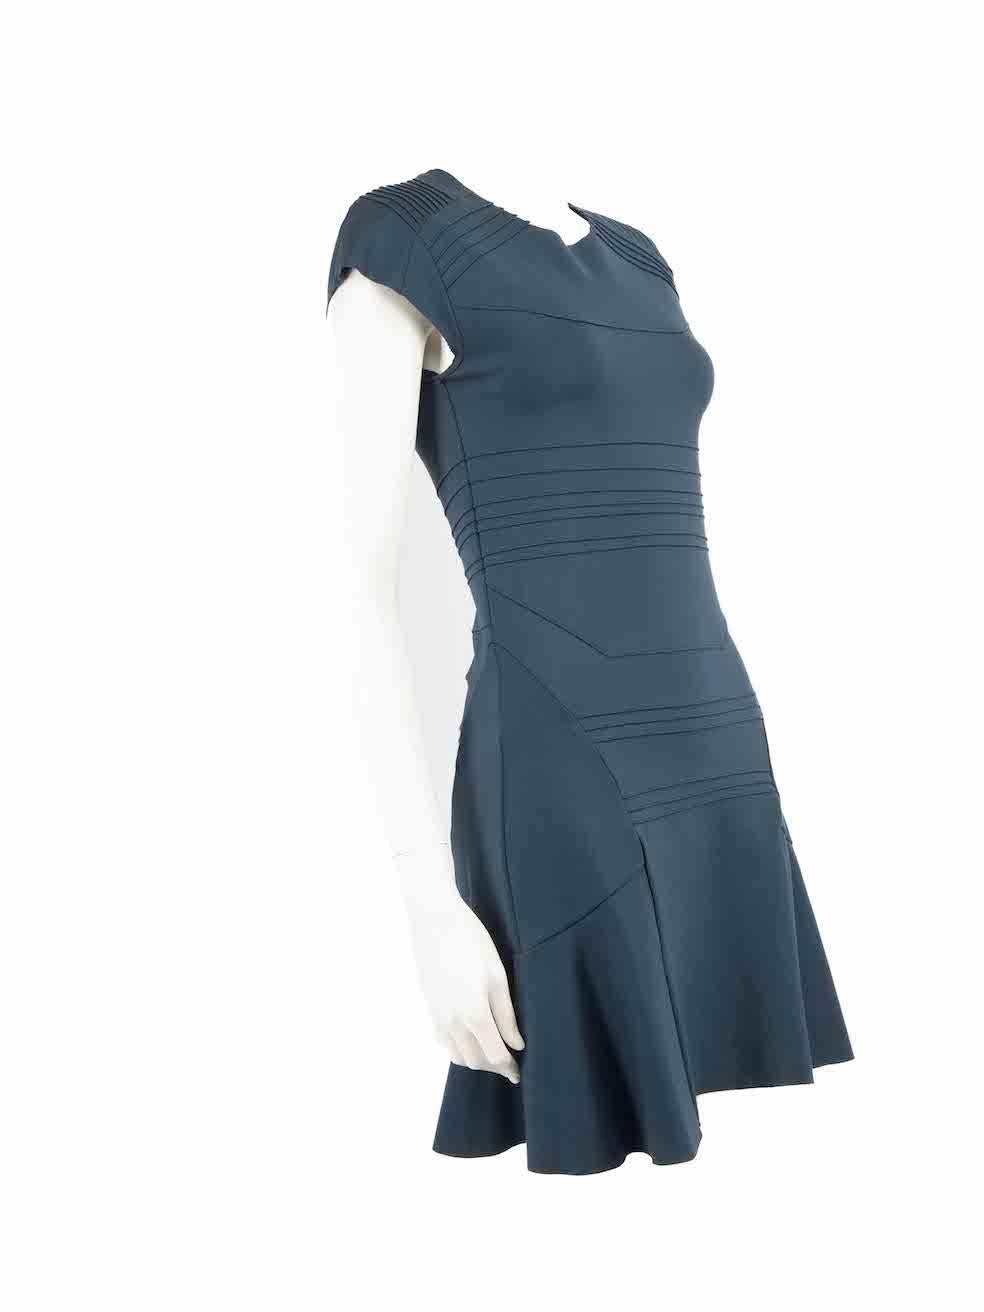 CONDITION is Very good. Minimal wear to dress is evident. Two small marks to the front of the dress near the waist and hem on this used Maje designer resale item.
 
 Details
 Blue
 Viscose
 Dress
 Short cap sleeves
 Mini
 Flared hem
 Round neck
